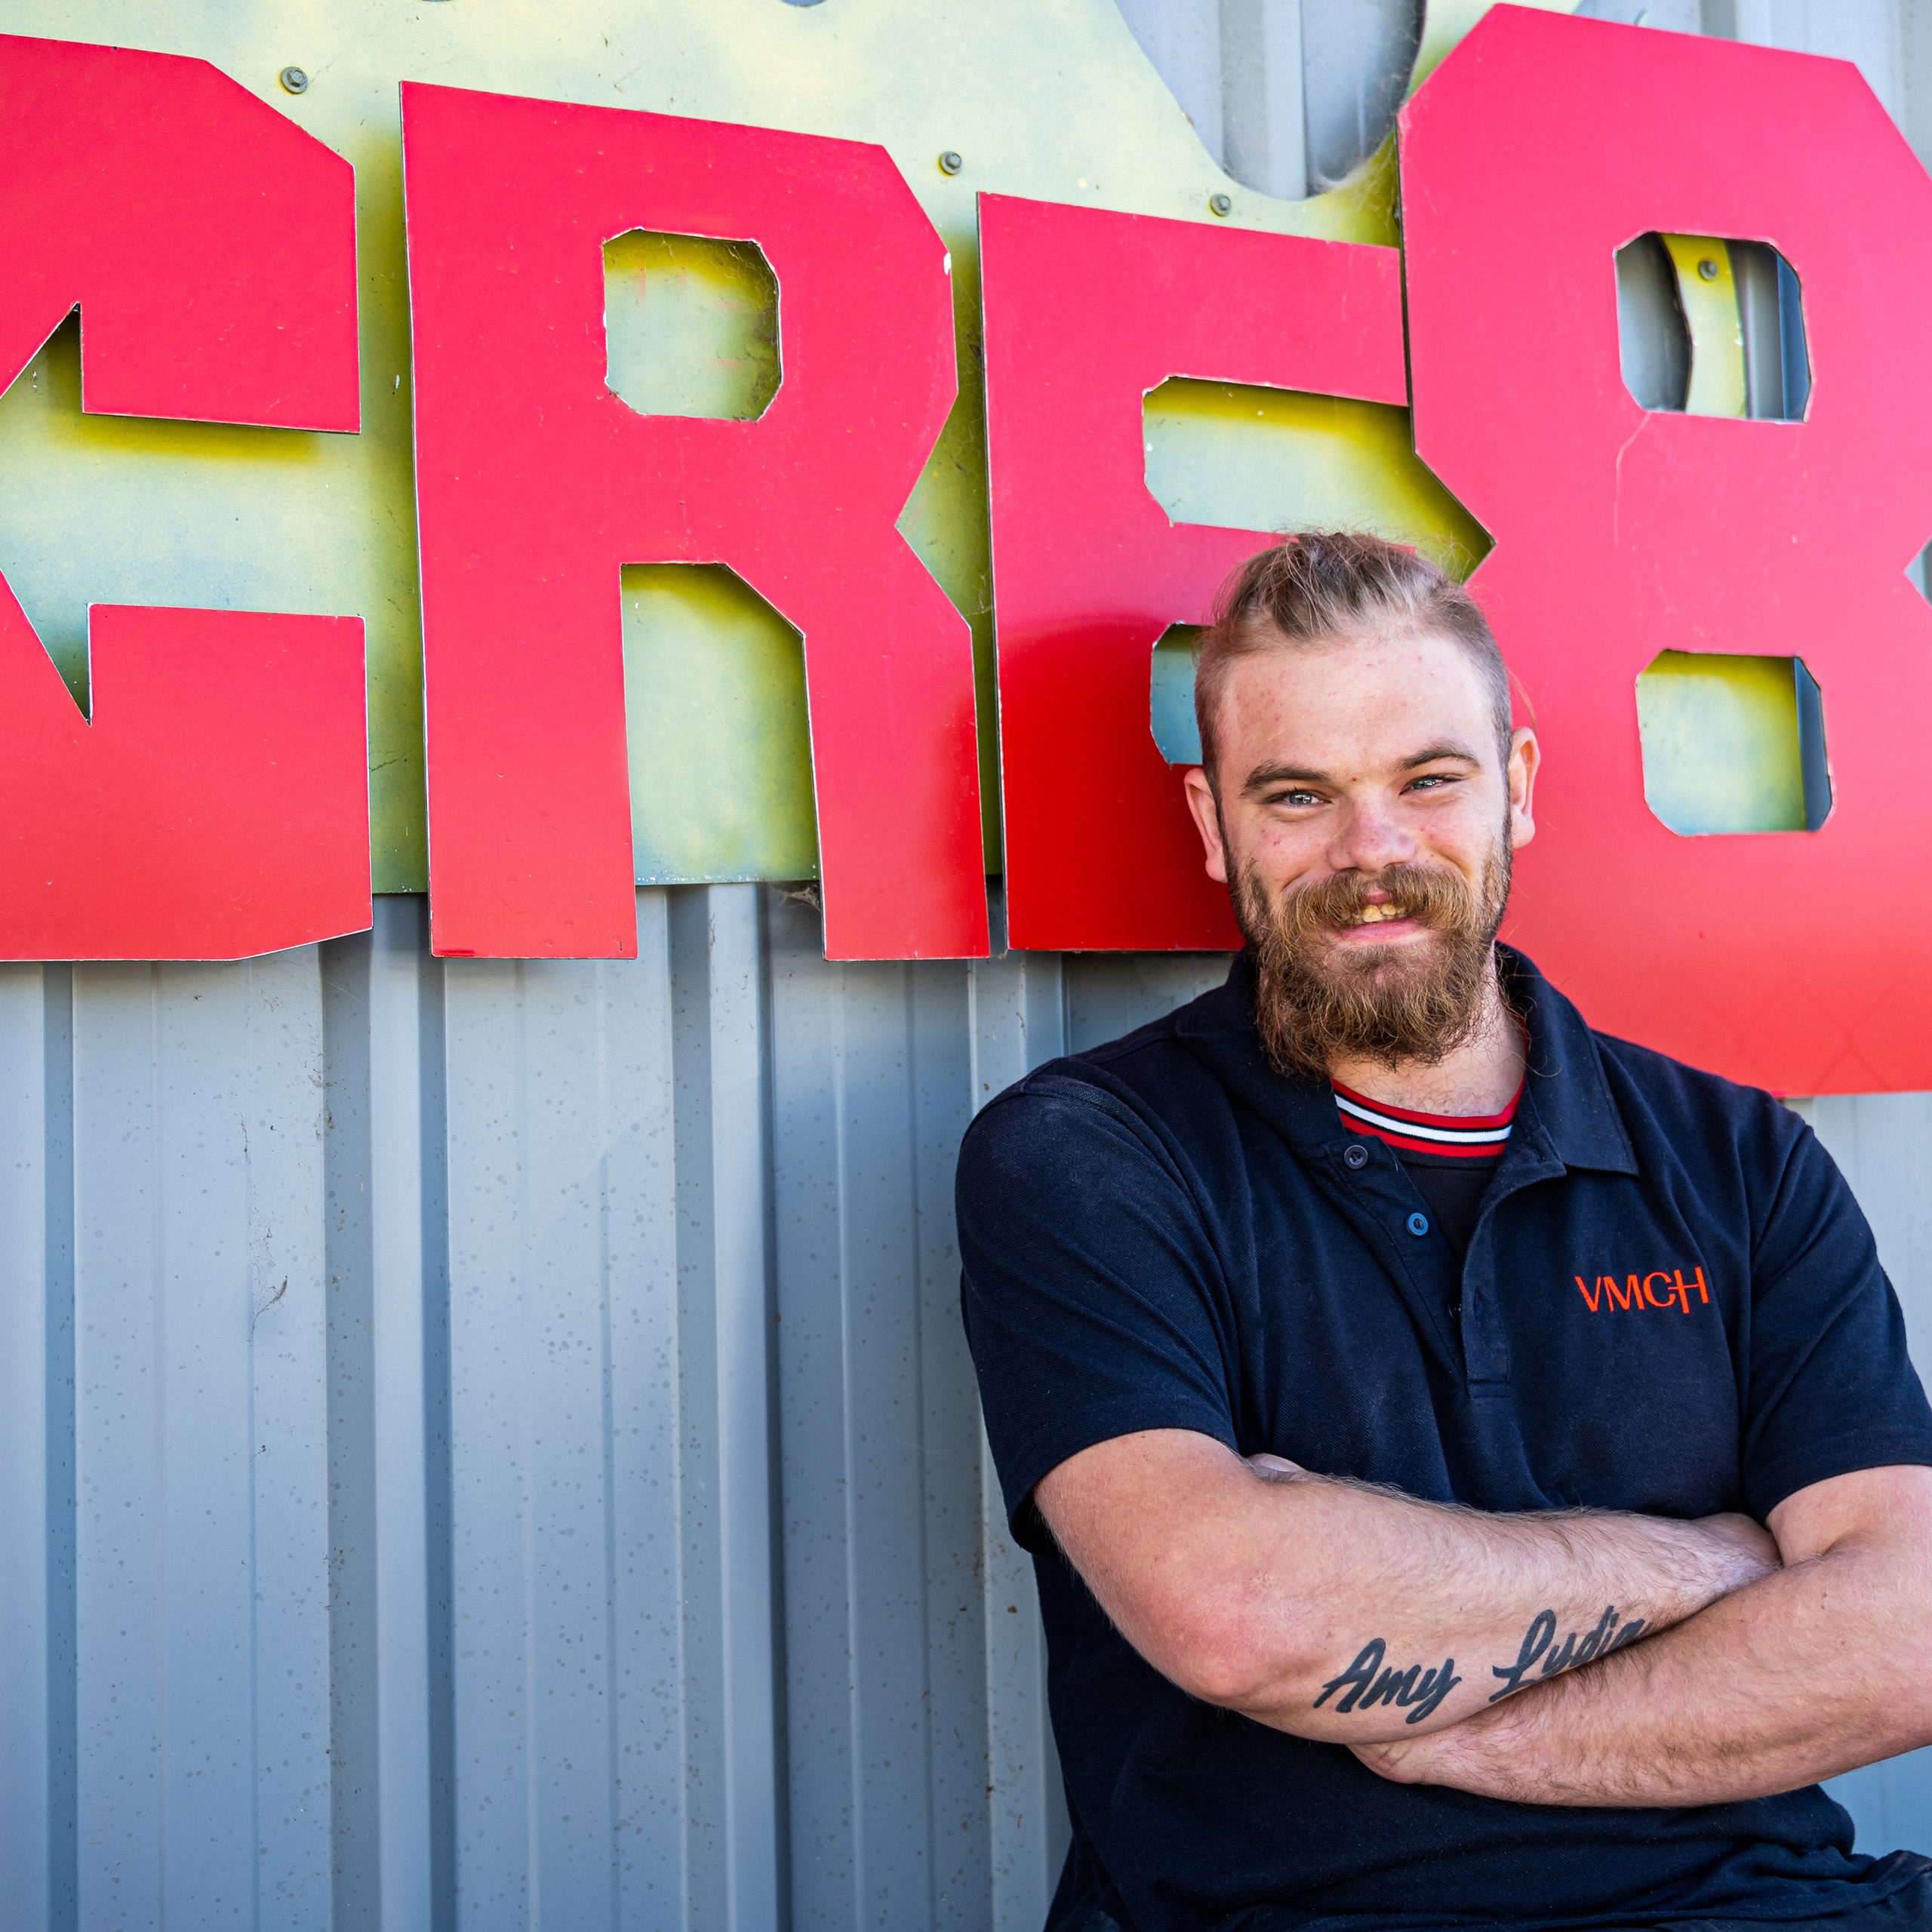 Male standing infront of the Cre8 sign, smiling